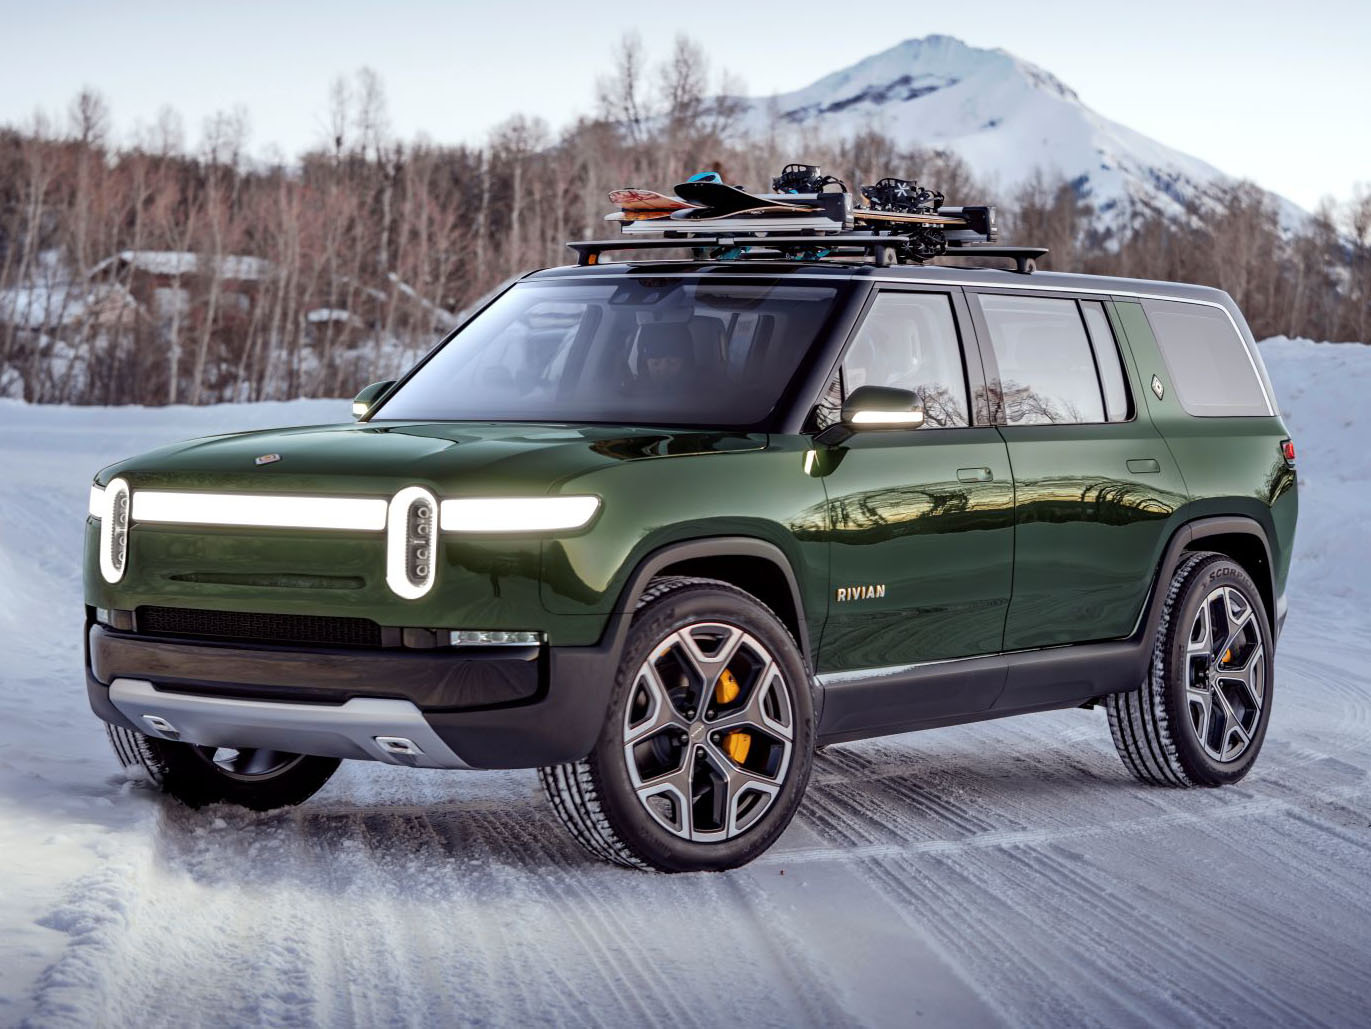 Pirelli and Rivian spent nearly two years developing the tires.